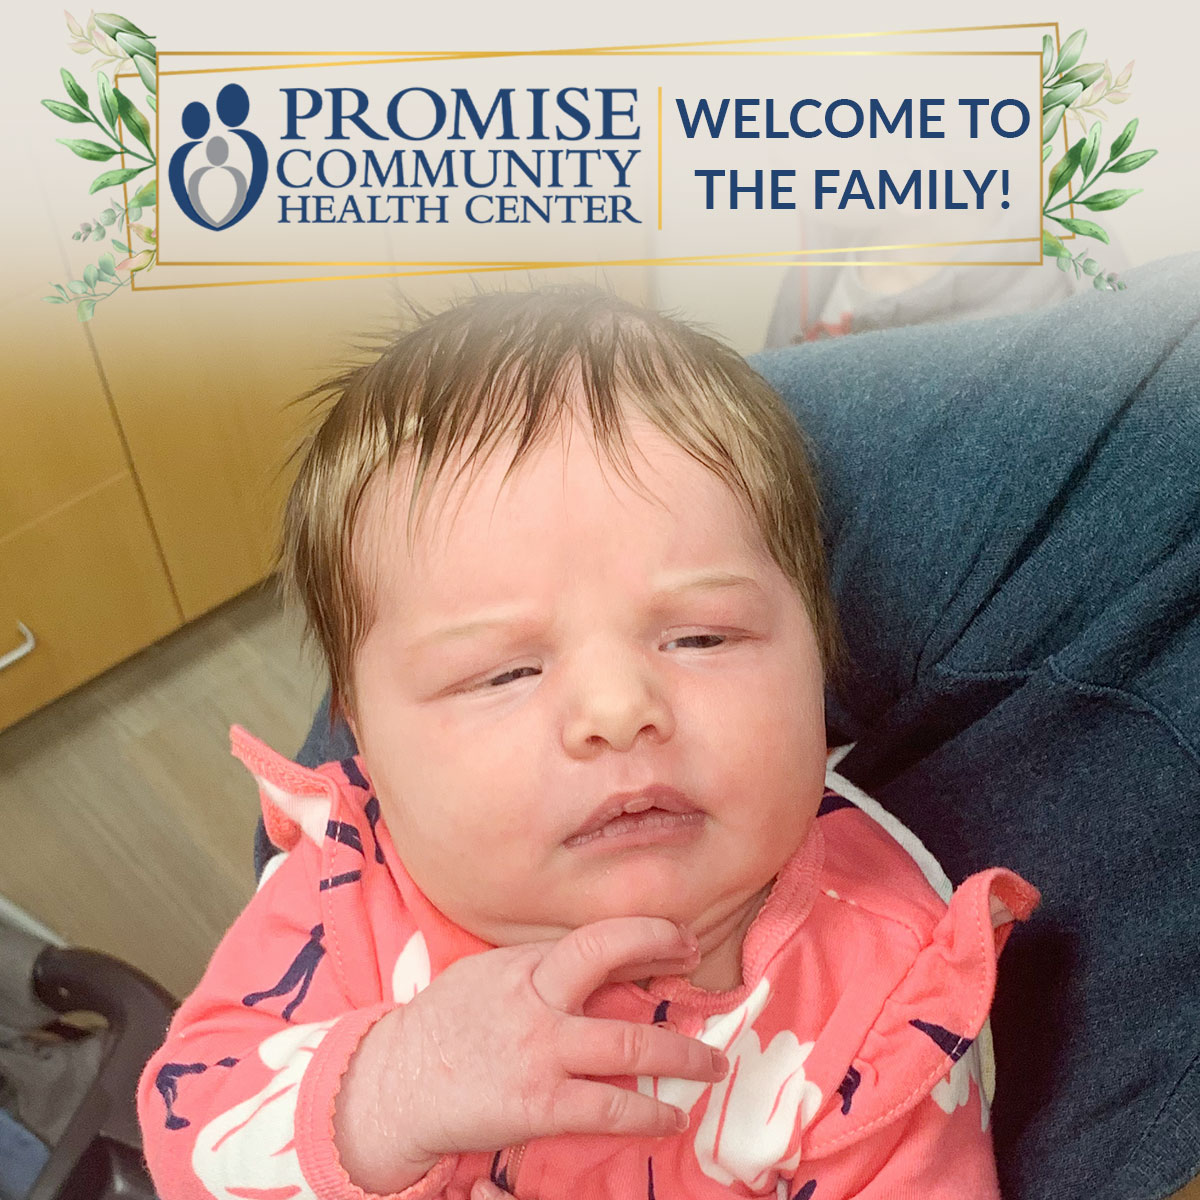 Massen Family from Doon Home Birth | Promise Community Health Center in Sioux Center, Iowa | Home births in northwest Iowa, Home births in southeast South Dakota, Home births in southwest Minnesota | Home births in Sioux Falls South Dakota, Home births in Beresford South Dakota, Home births in Sioux City IA, Home births in LeMars IA, Home births in Worthington MN, Home births in Iowa, Home births in South Dakota, Home births in Minnesota